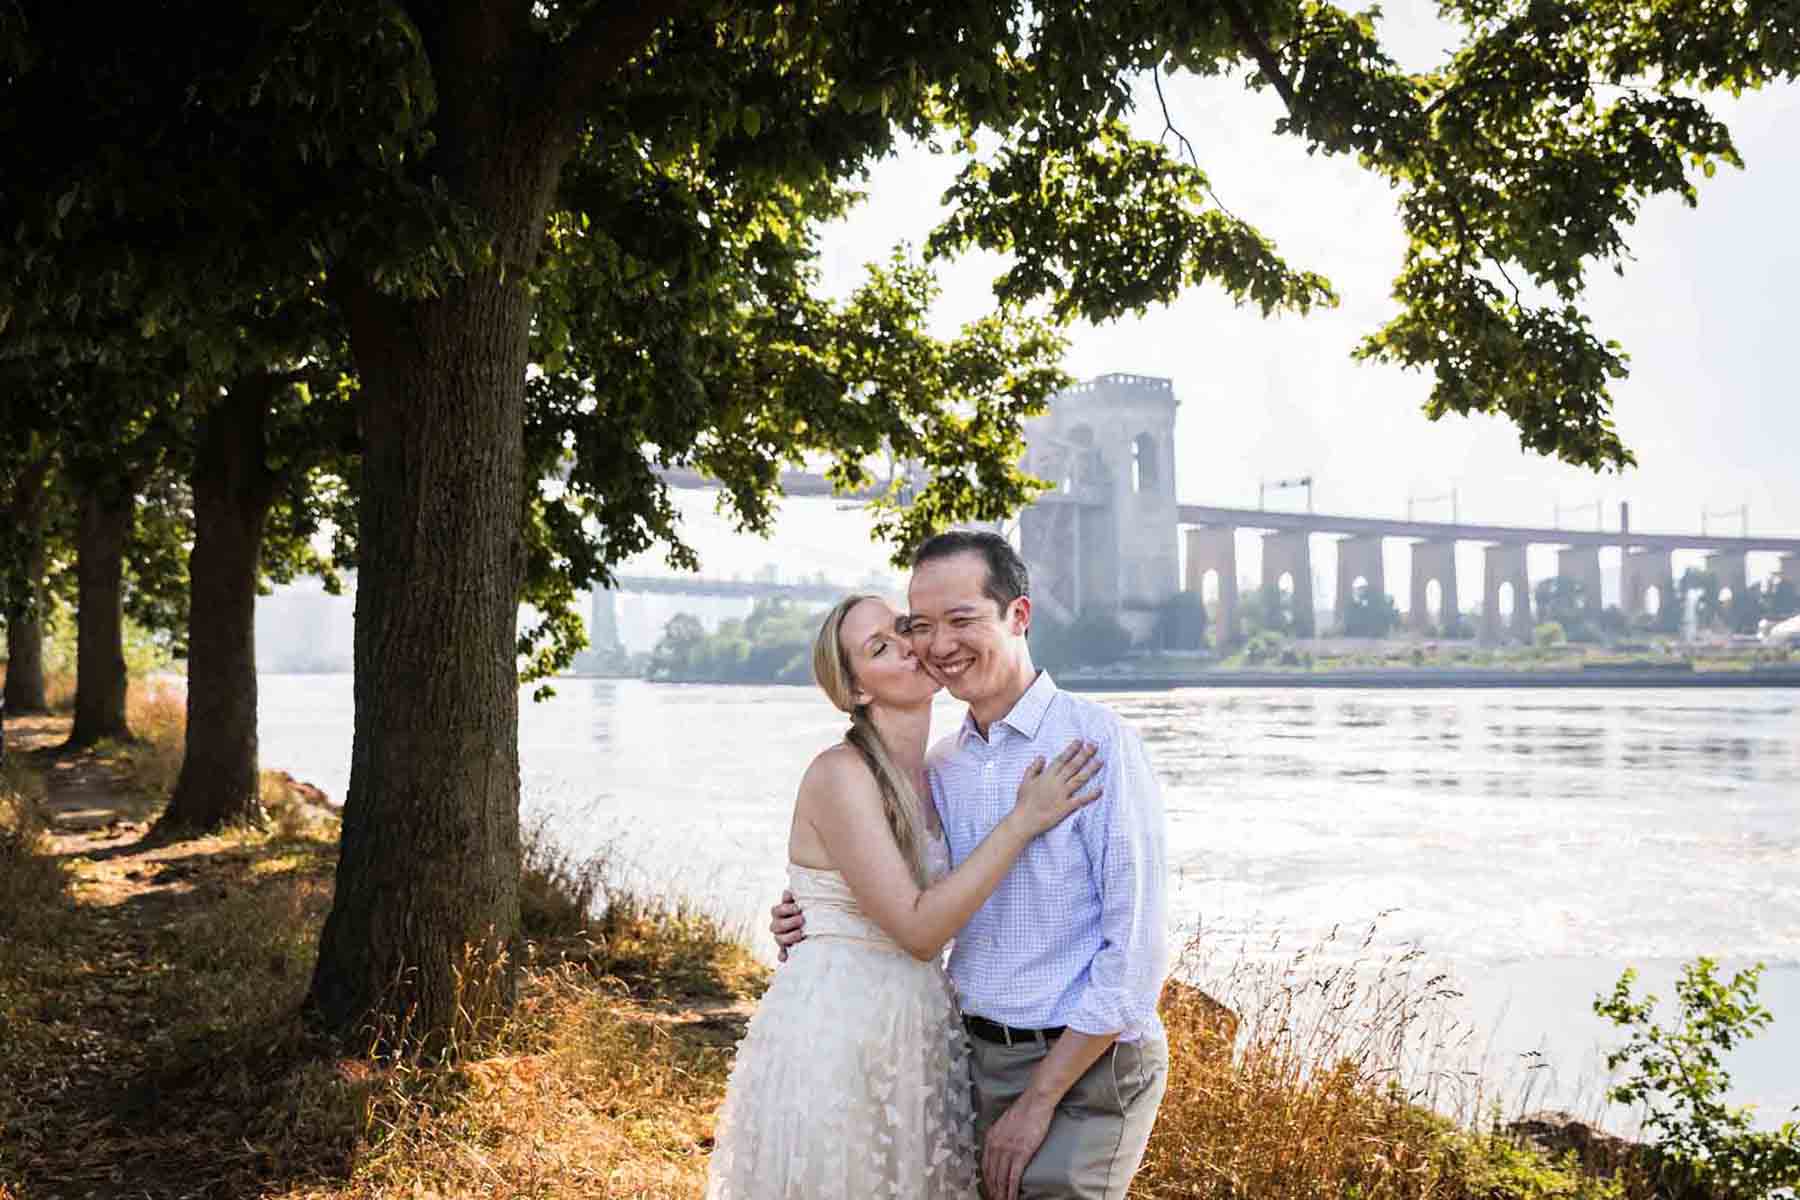 Astoria Park engagement photos of a woman kissing man on the cheek along waterfront